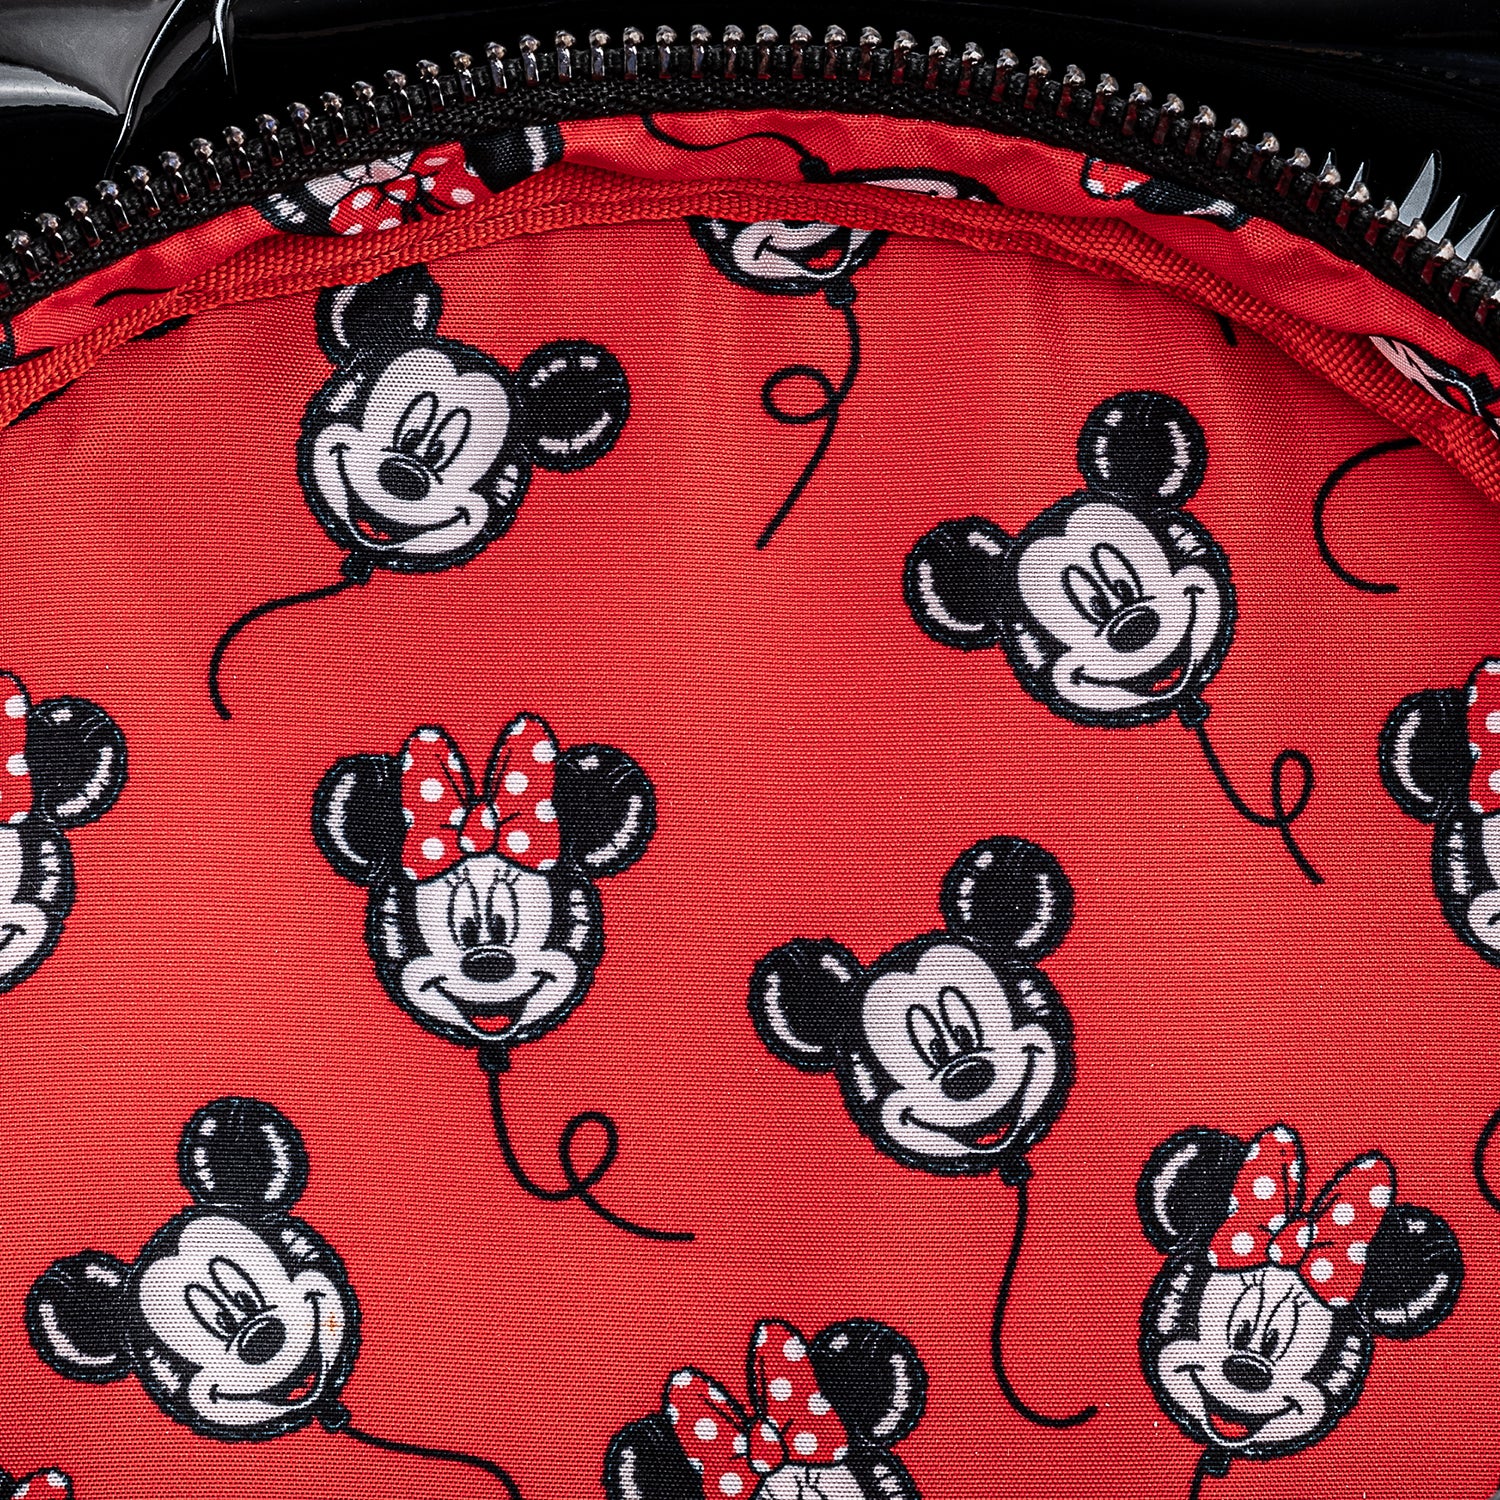 Funko Pop! by Loungefly Mickey & Minnie Mouse Cosplay Mini Backpack -  Merchoid